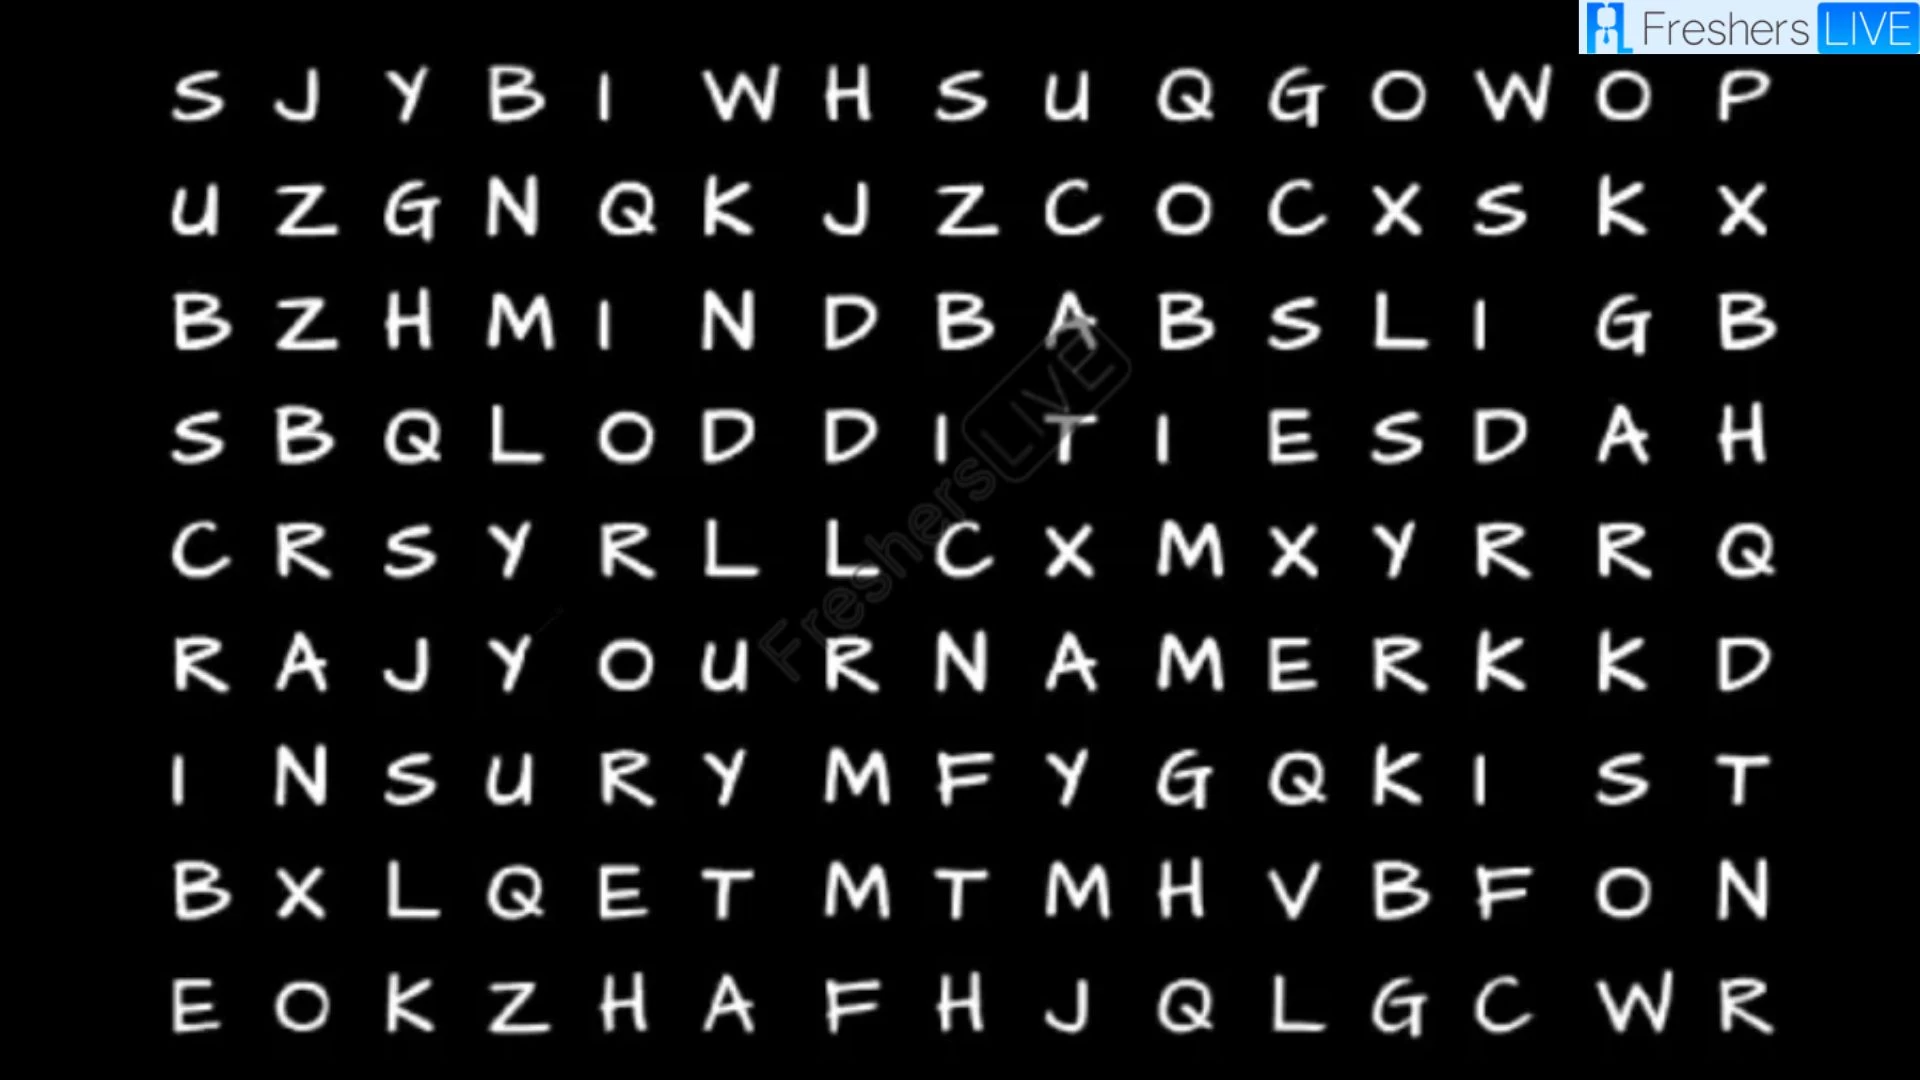 A Challenge for the Brightest Minds: Can You Locate Your Name Here?